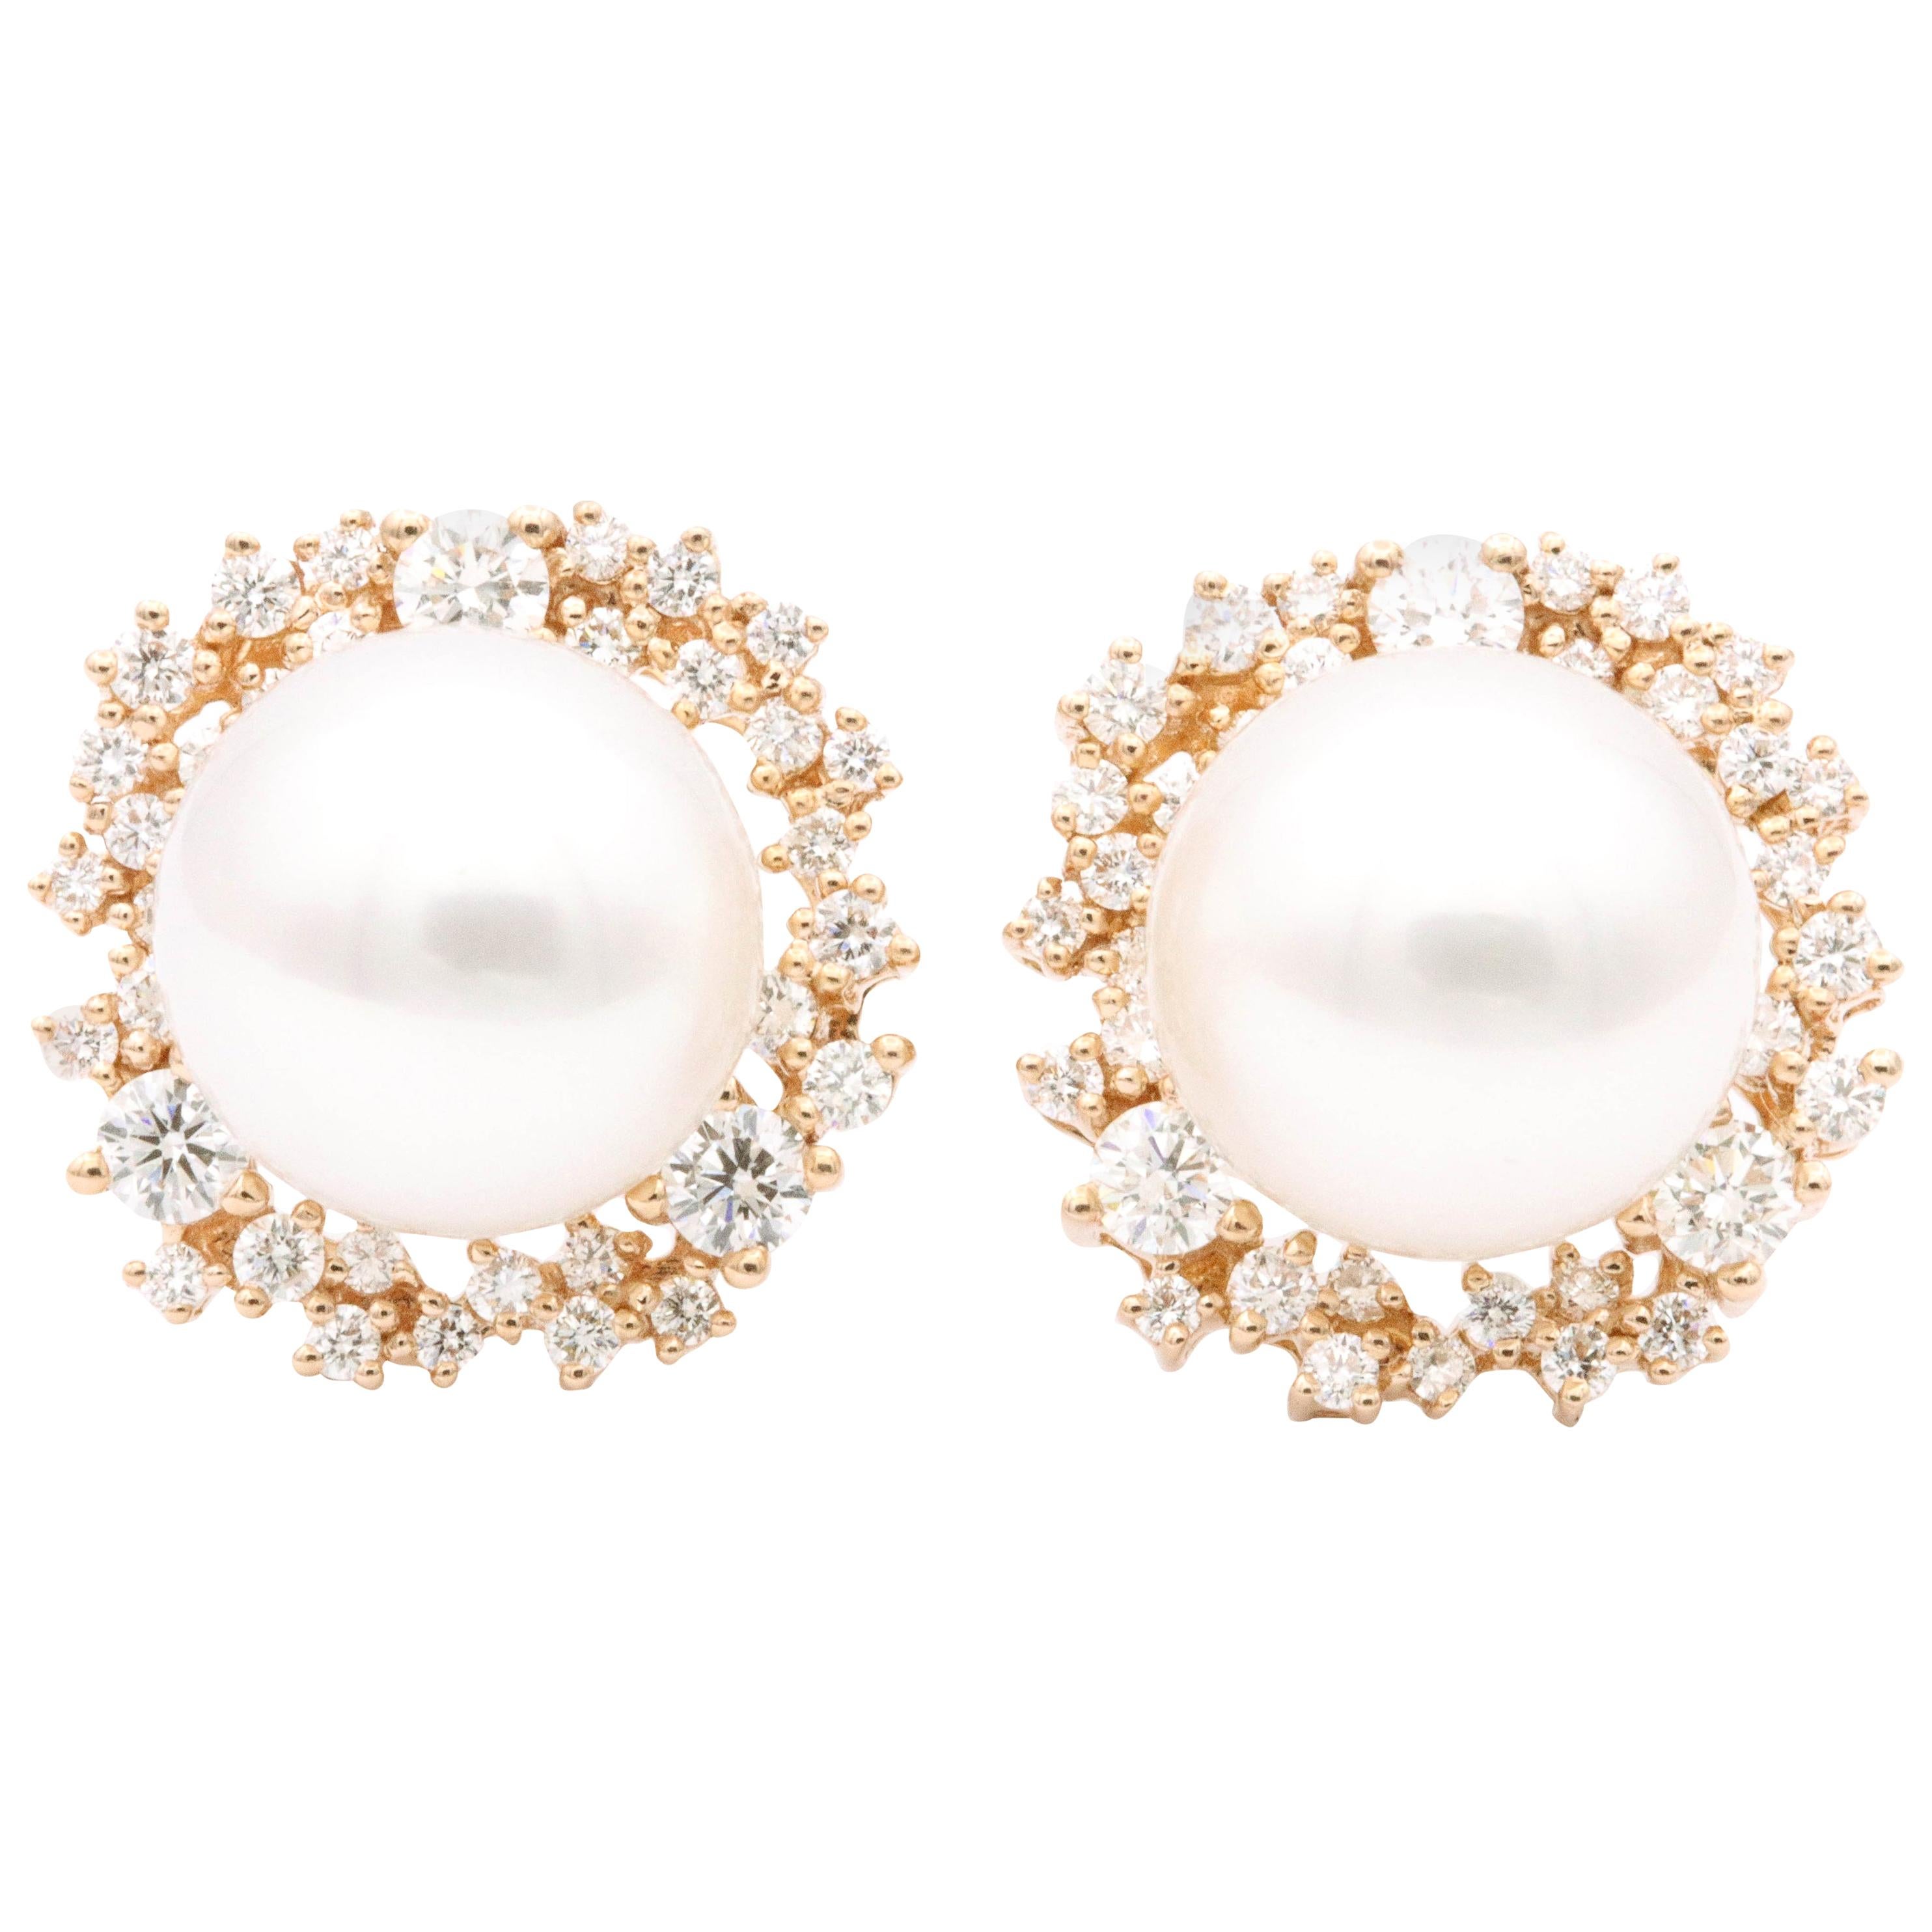 South Sea Pearl and Diamonds with Rose Gold Studs Earrings